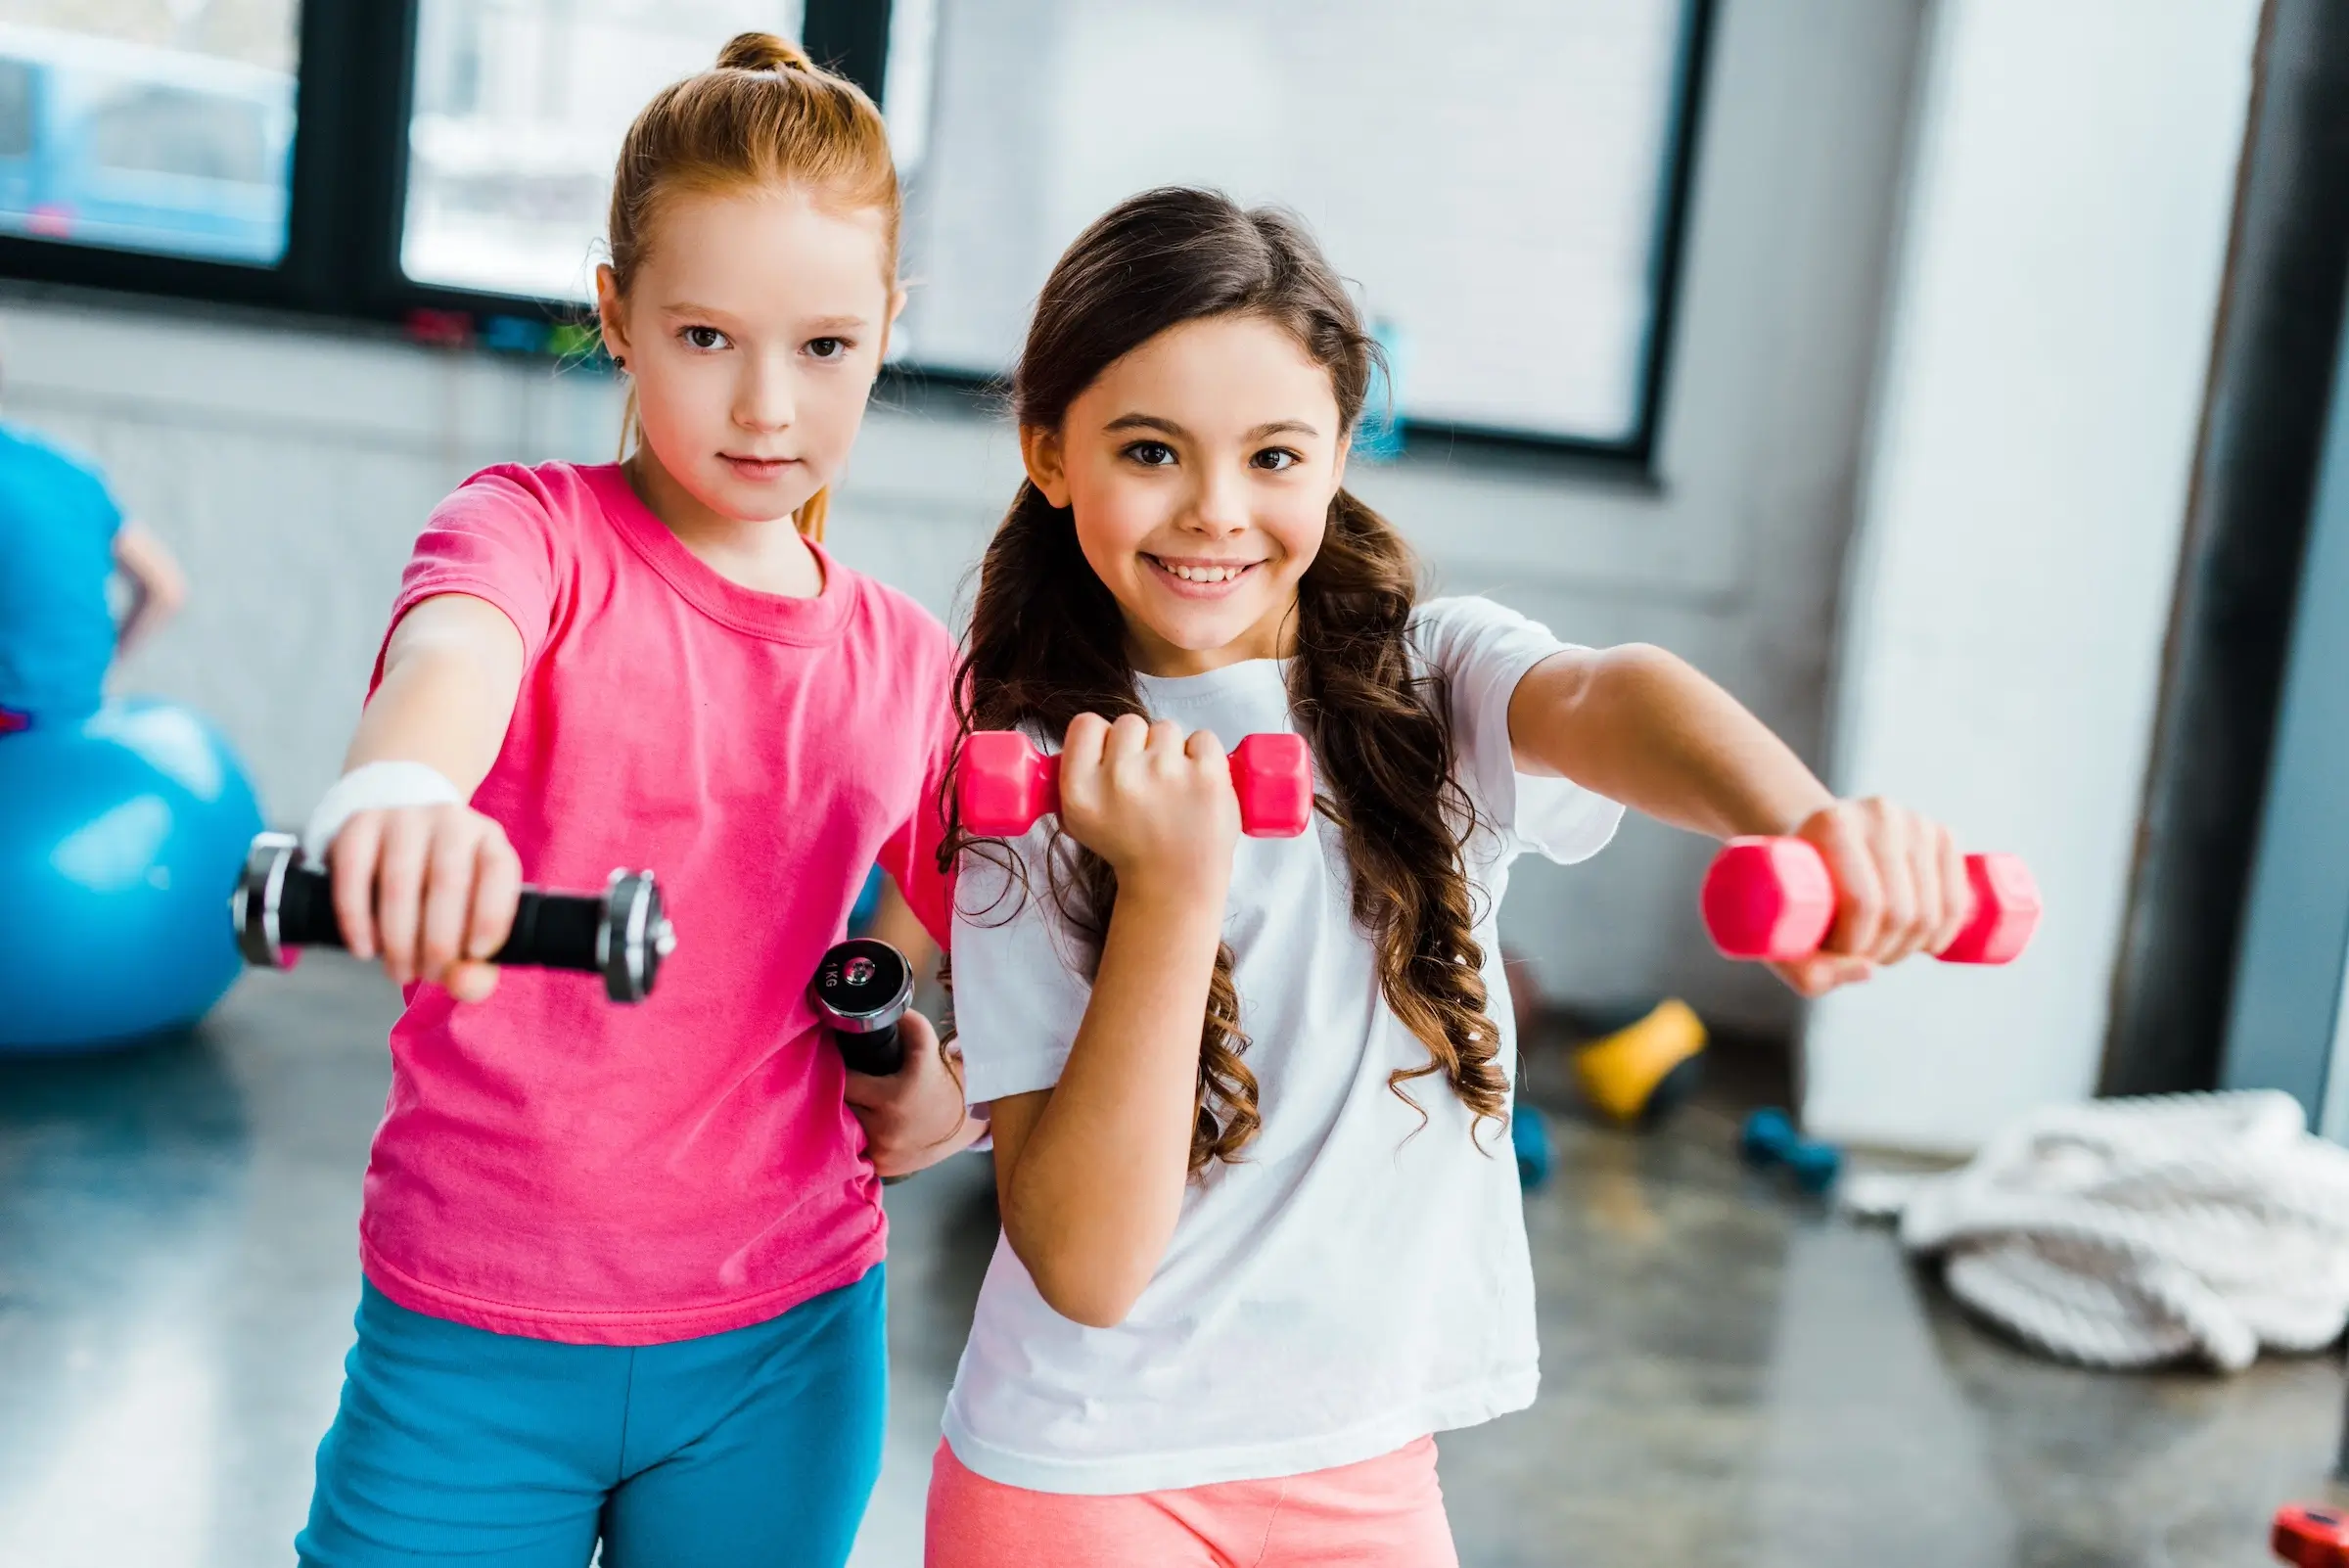 Two girls holding dumbbells in a gym.